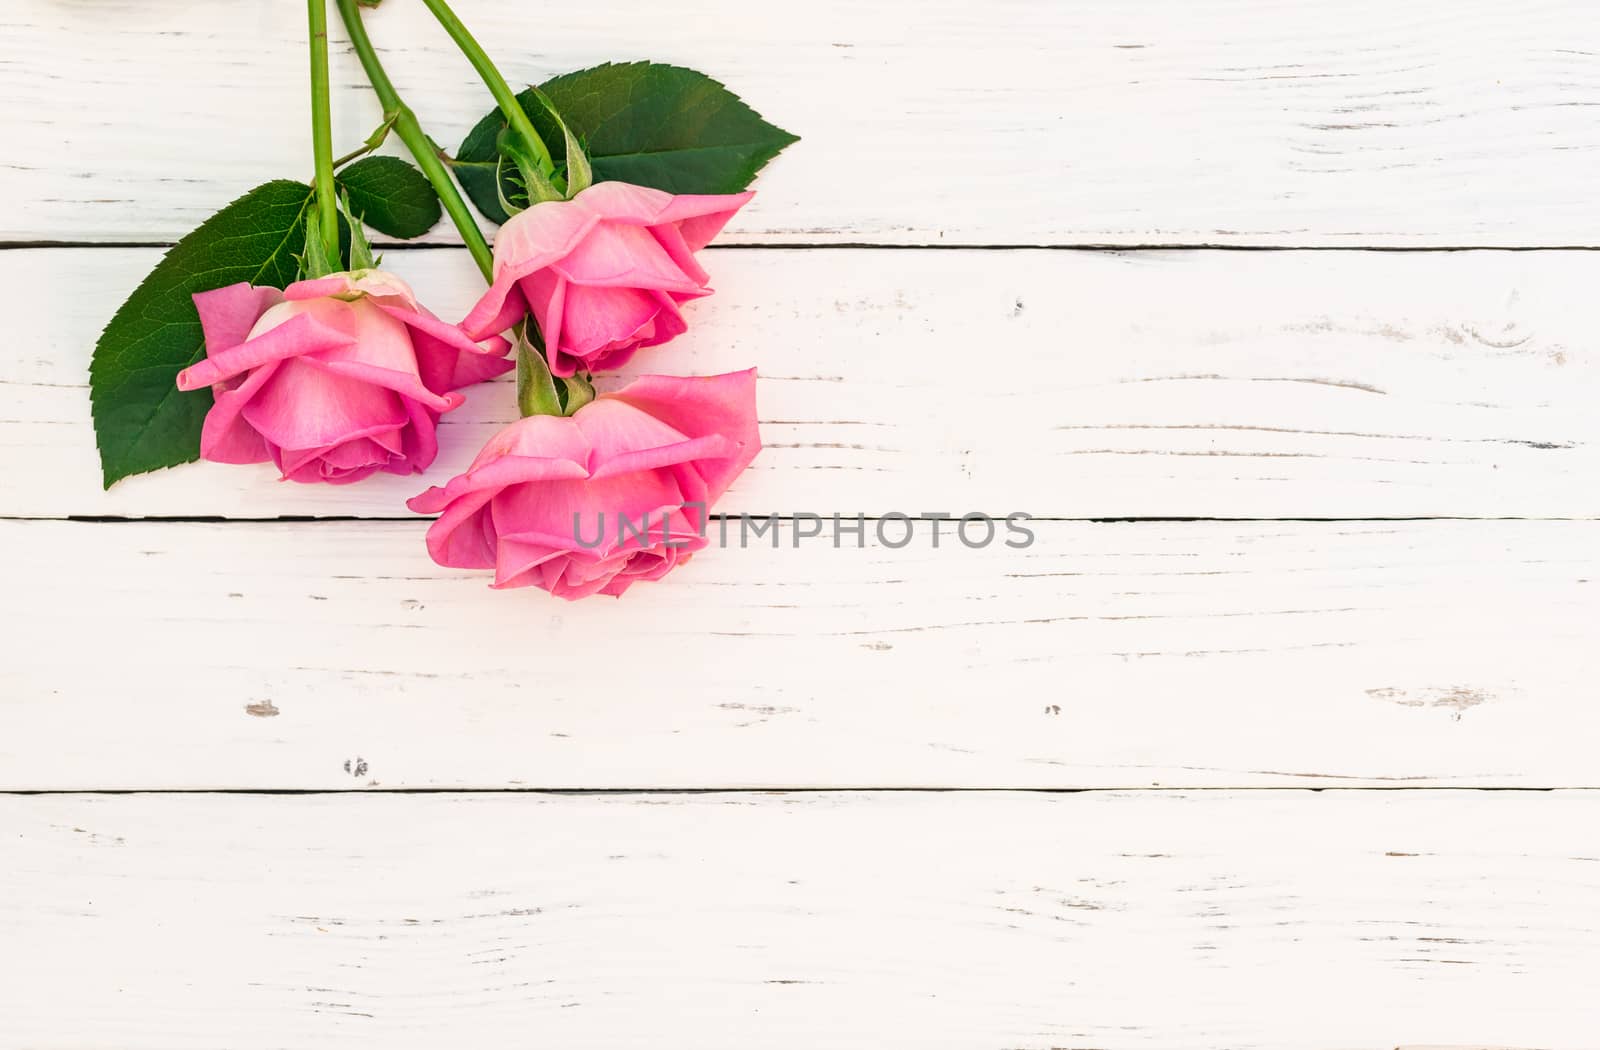 Bunch of roses on white background with copy space